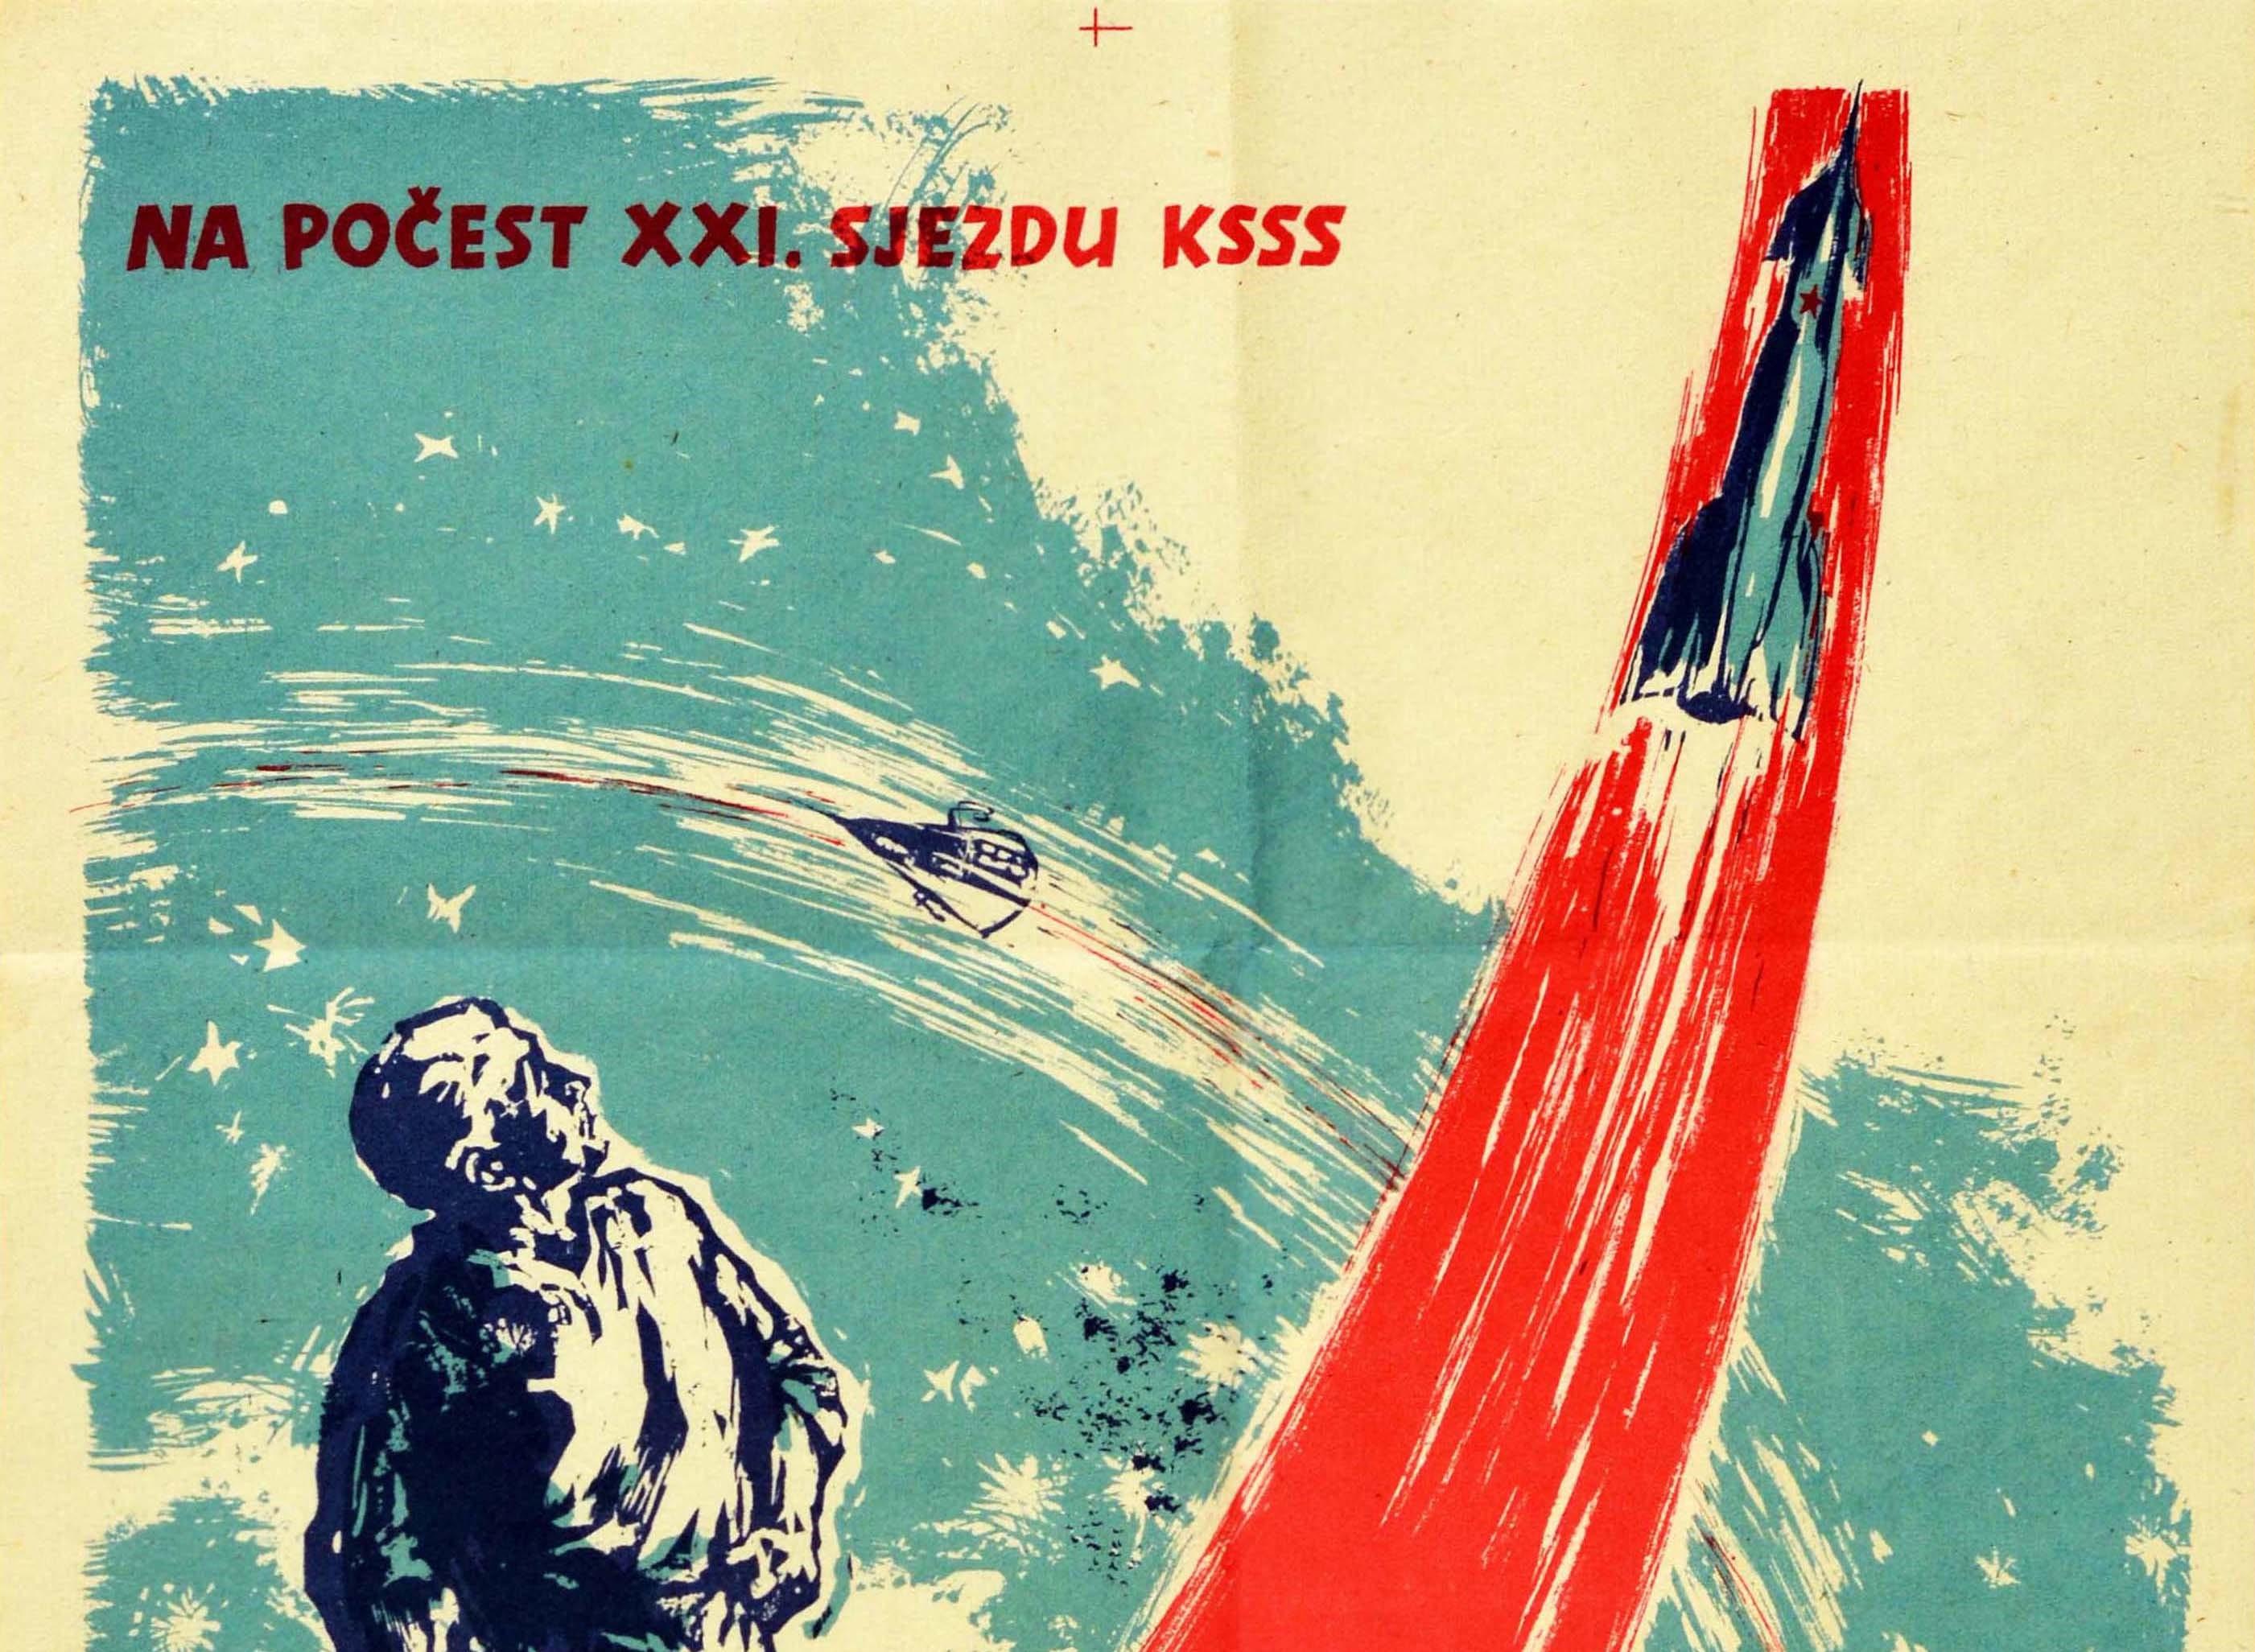 Original vintage space race propaganda poster reading - Socialusmus dokazuje svou prevahu na zemi i ve vesmiru / Socialism proves its predominance on earth and in space - featuring dynamic artwork showing a man standing on a globe of the world with